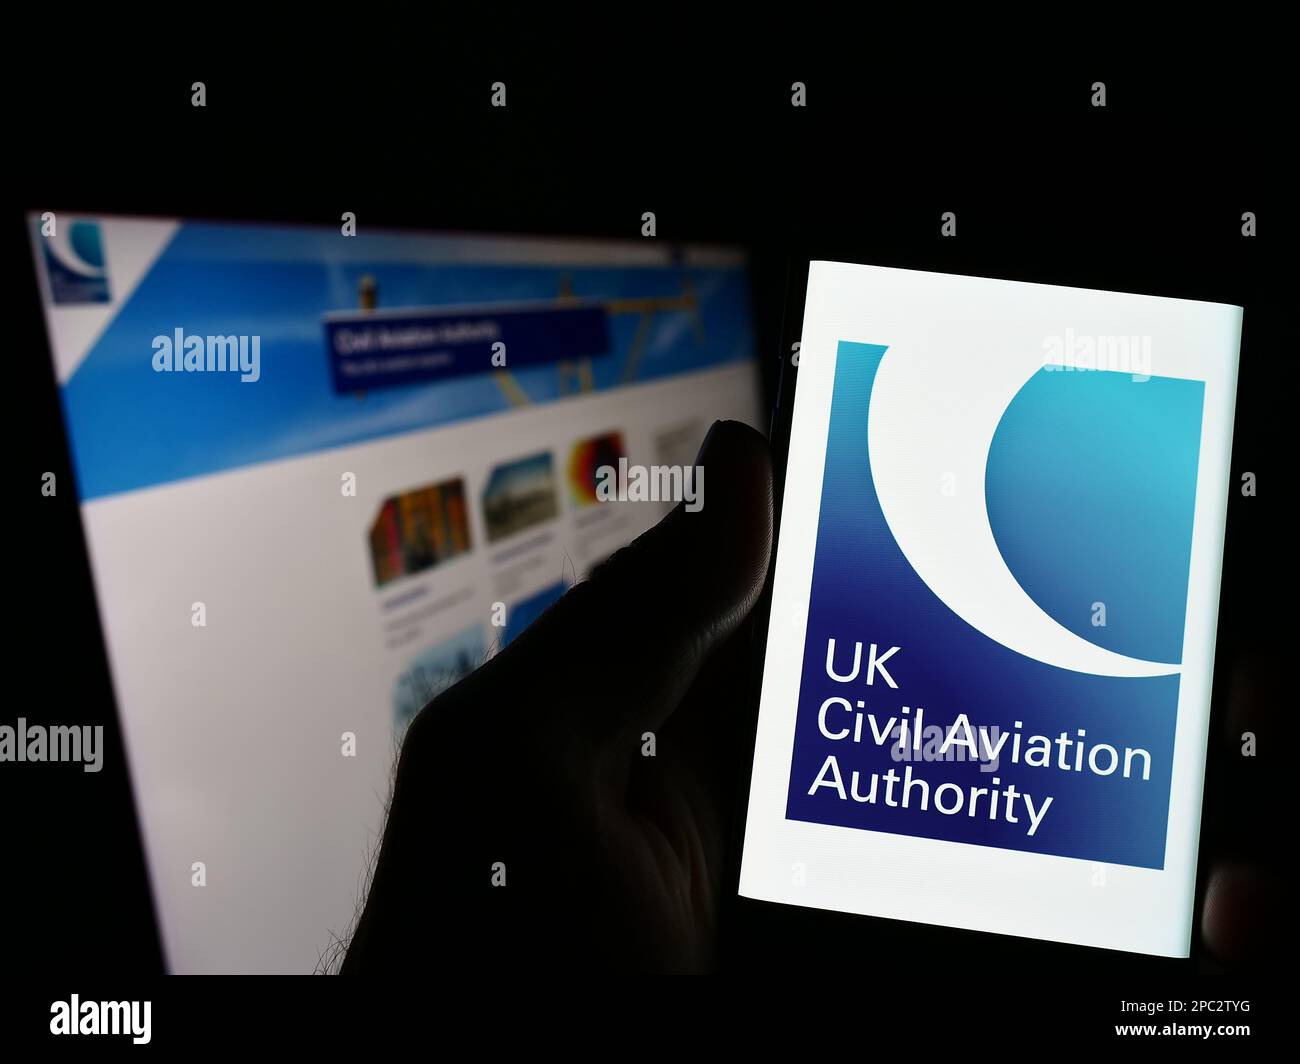 Person holding smartphone with logo of British regulator Civil Aviation Authority (CAA) on screen in front of website. Focus on phone display. Stock Photo